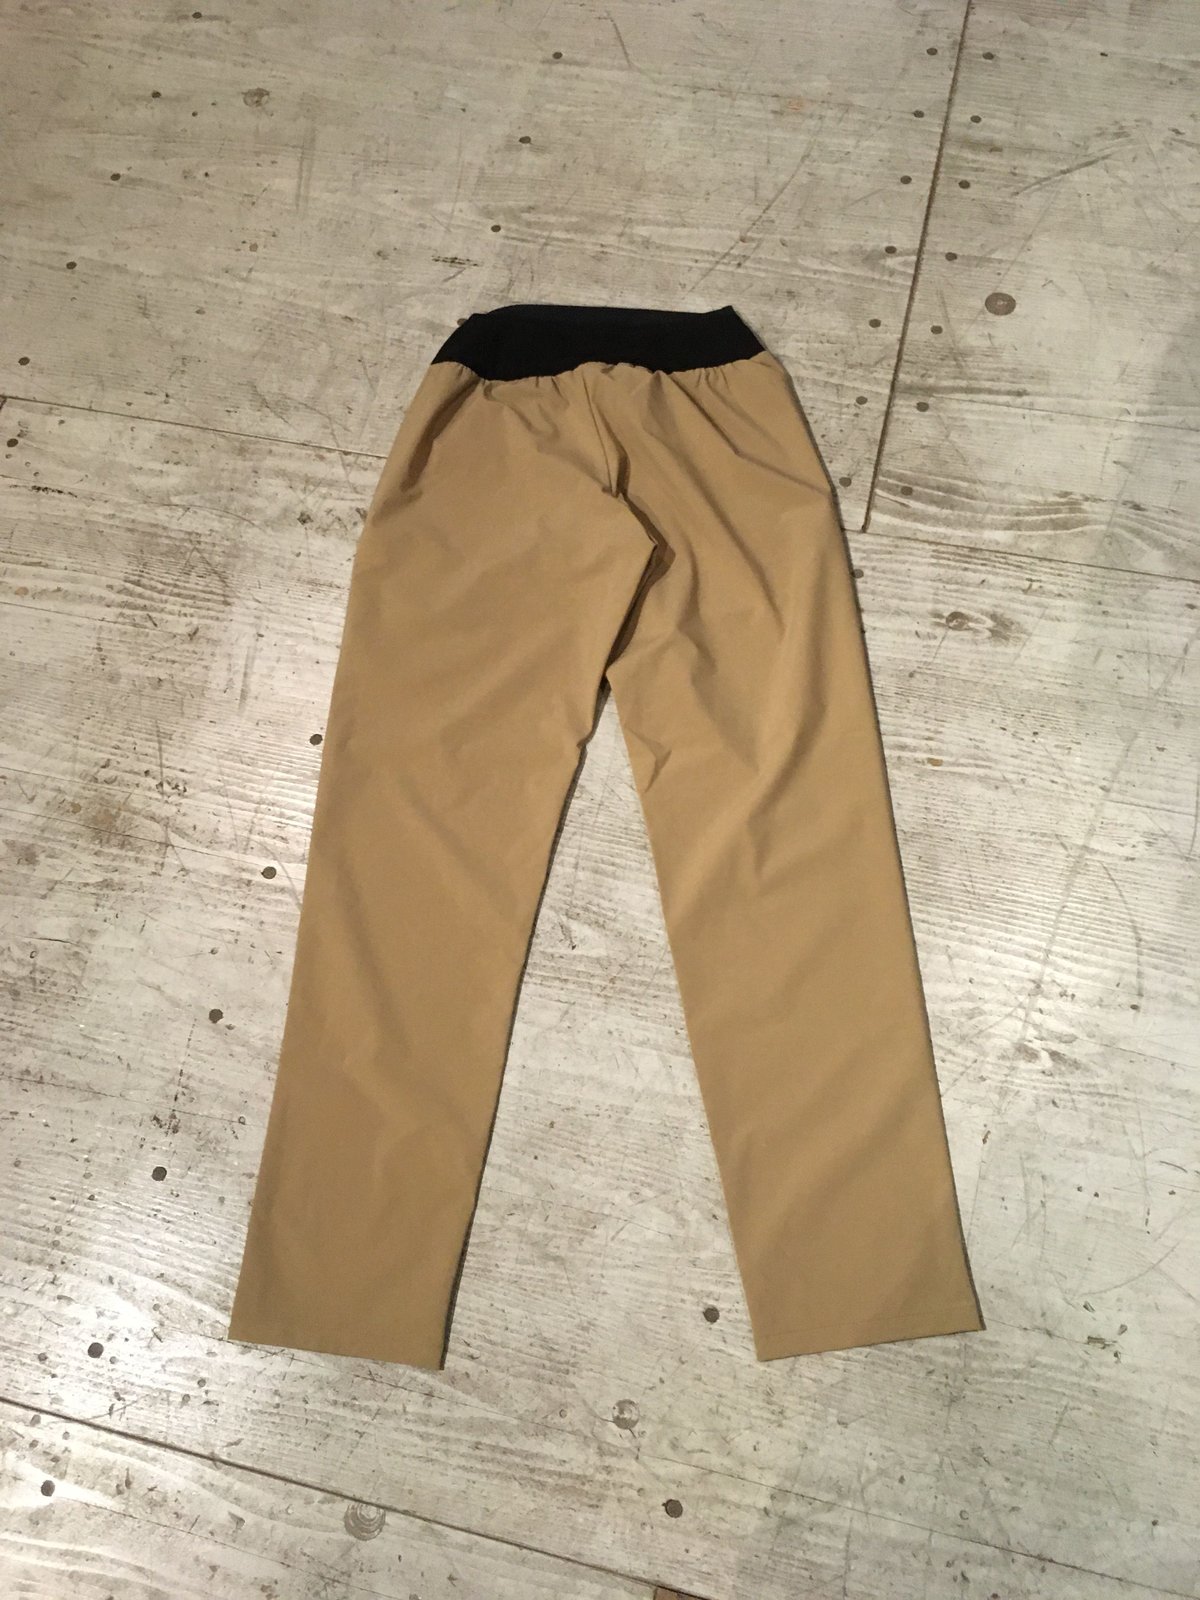 THE NORTH FACE『Verb Light Running pants』（ケルプタン）...